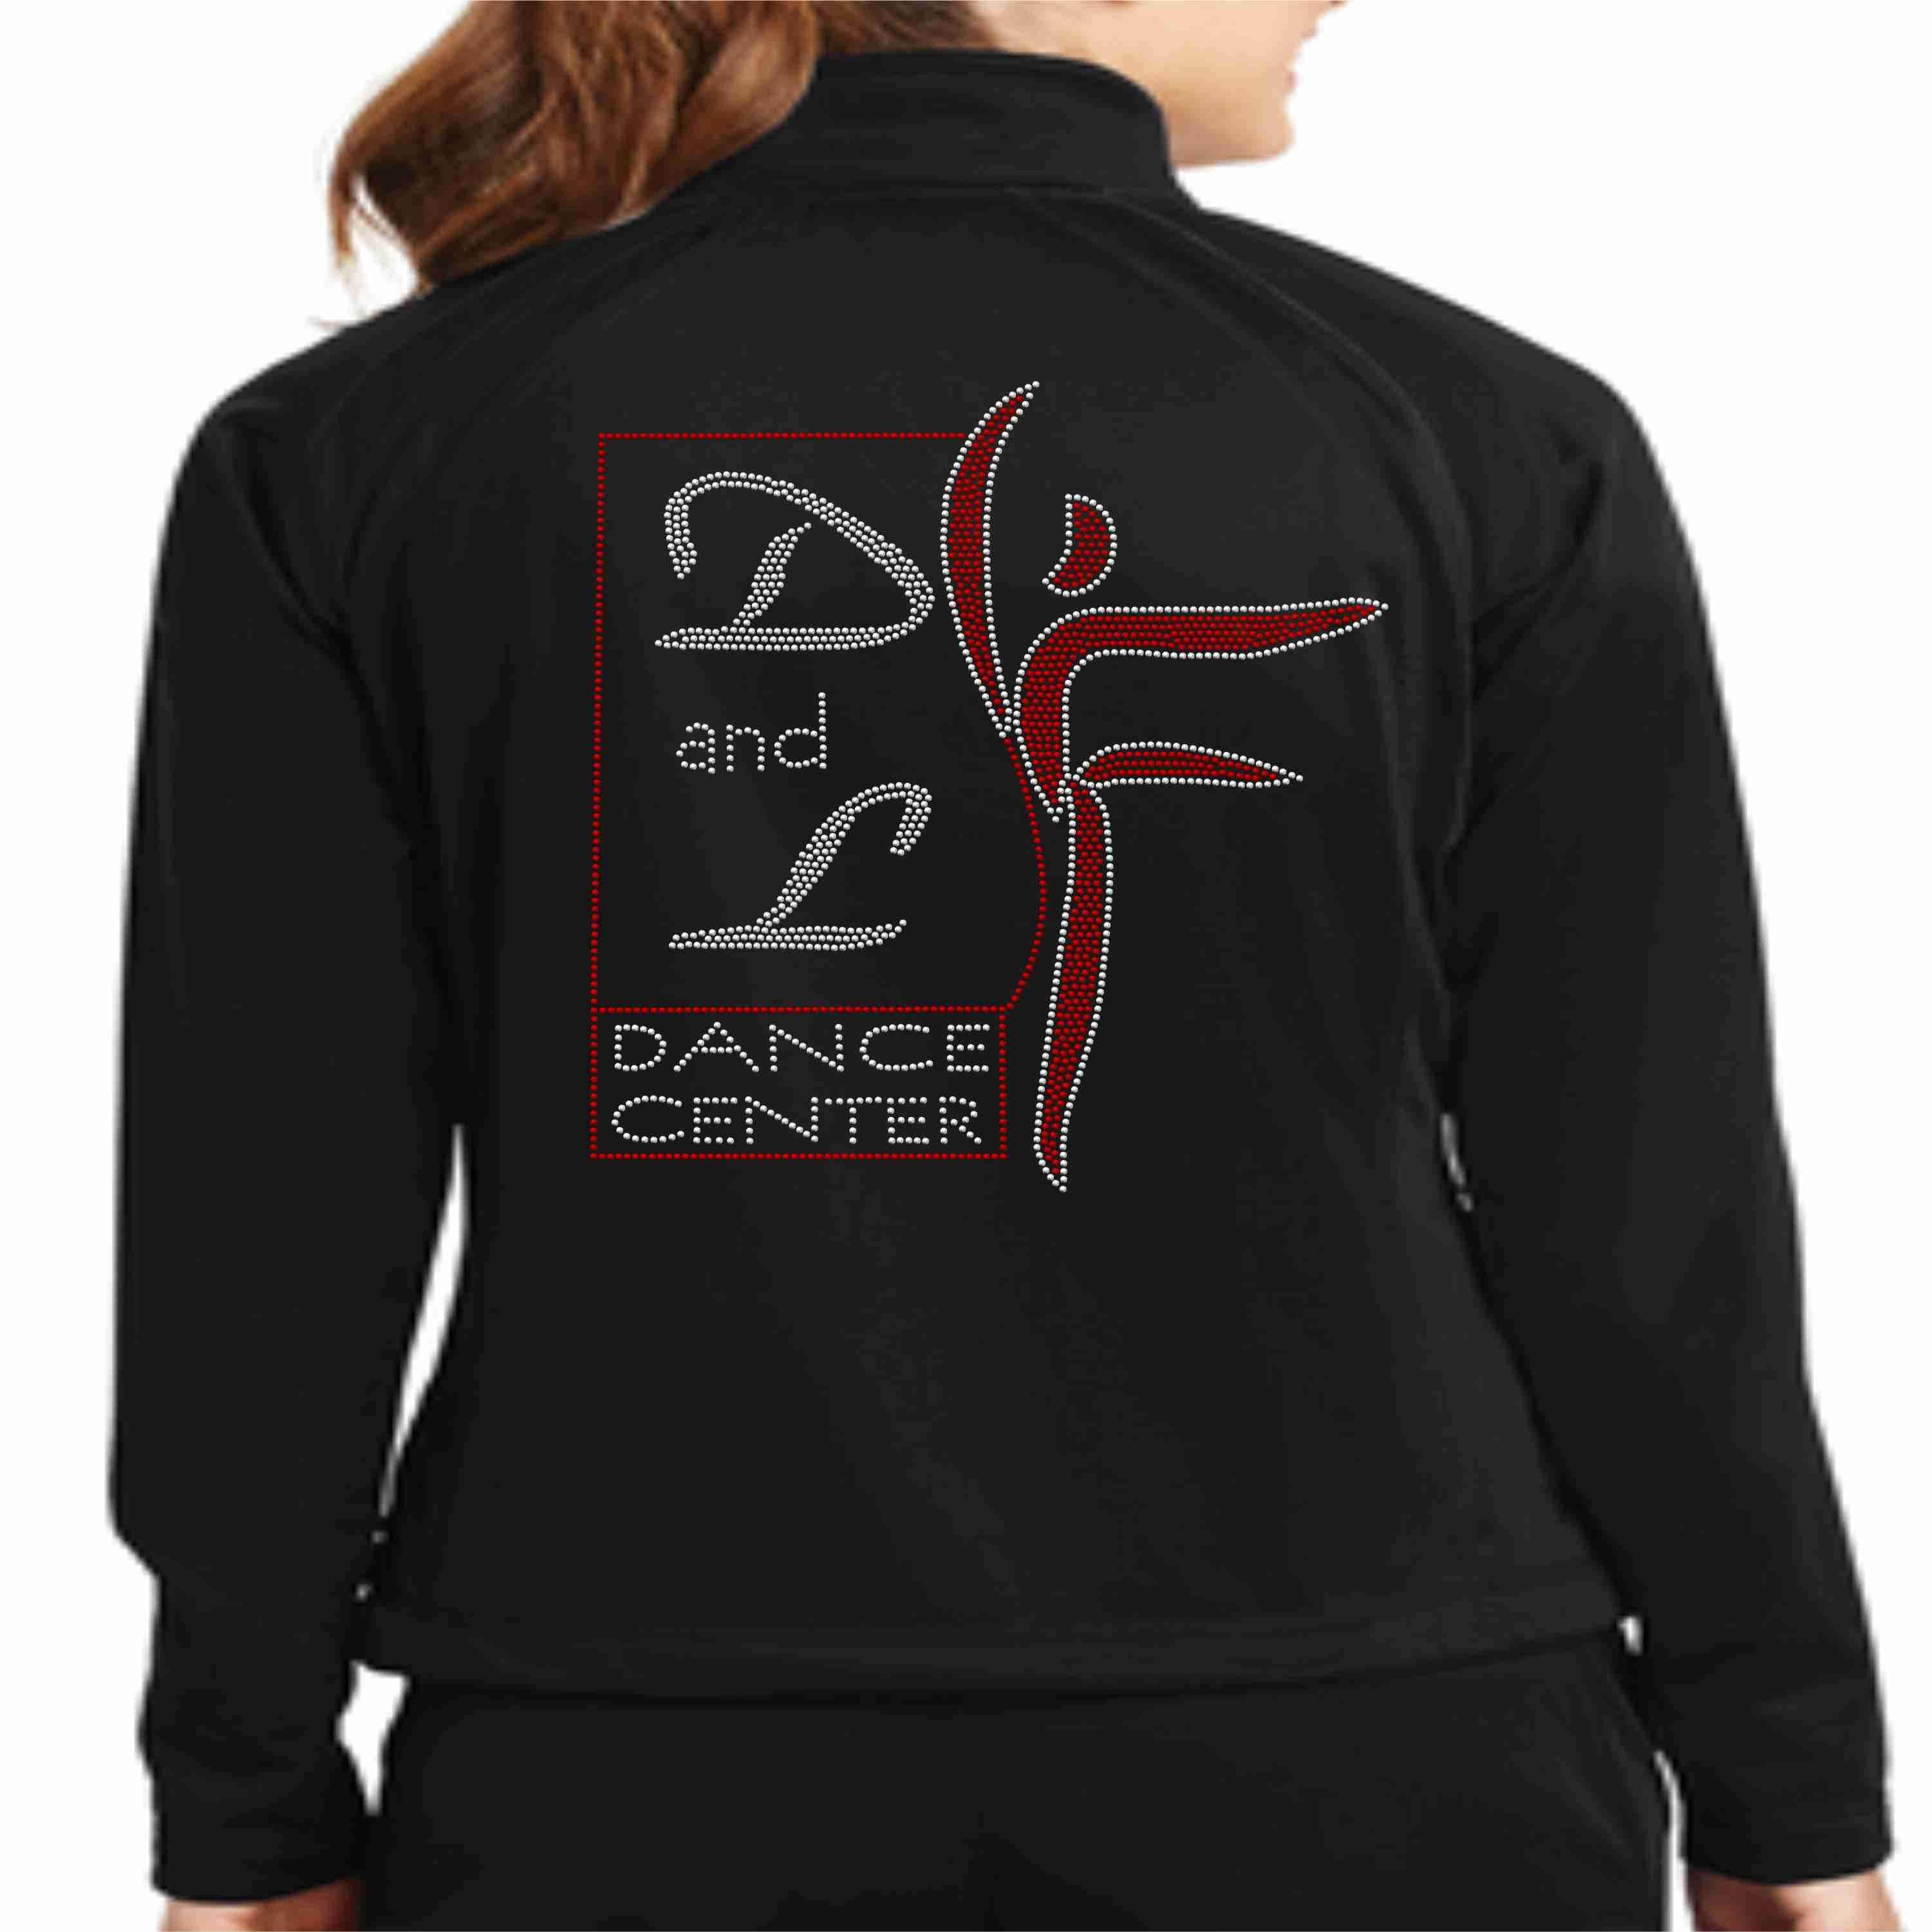 D and L Dance Center Spangle Bling Ladies and Youth Tricot Cadet Jacket Zip up jacket Becky's Boutique Ladies Small 